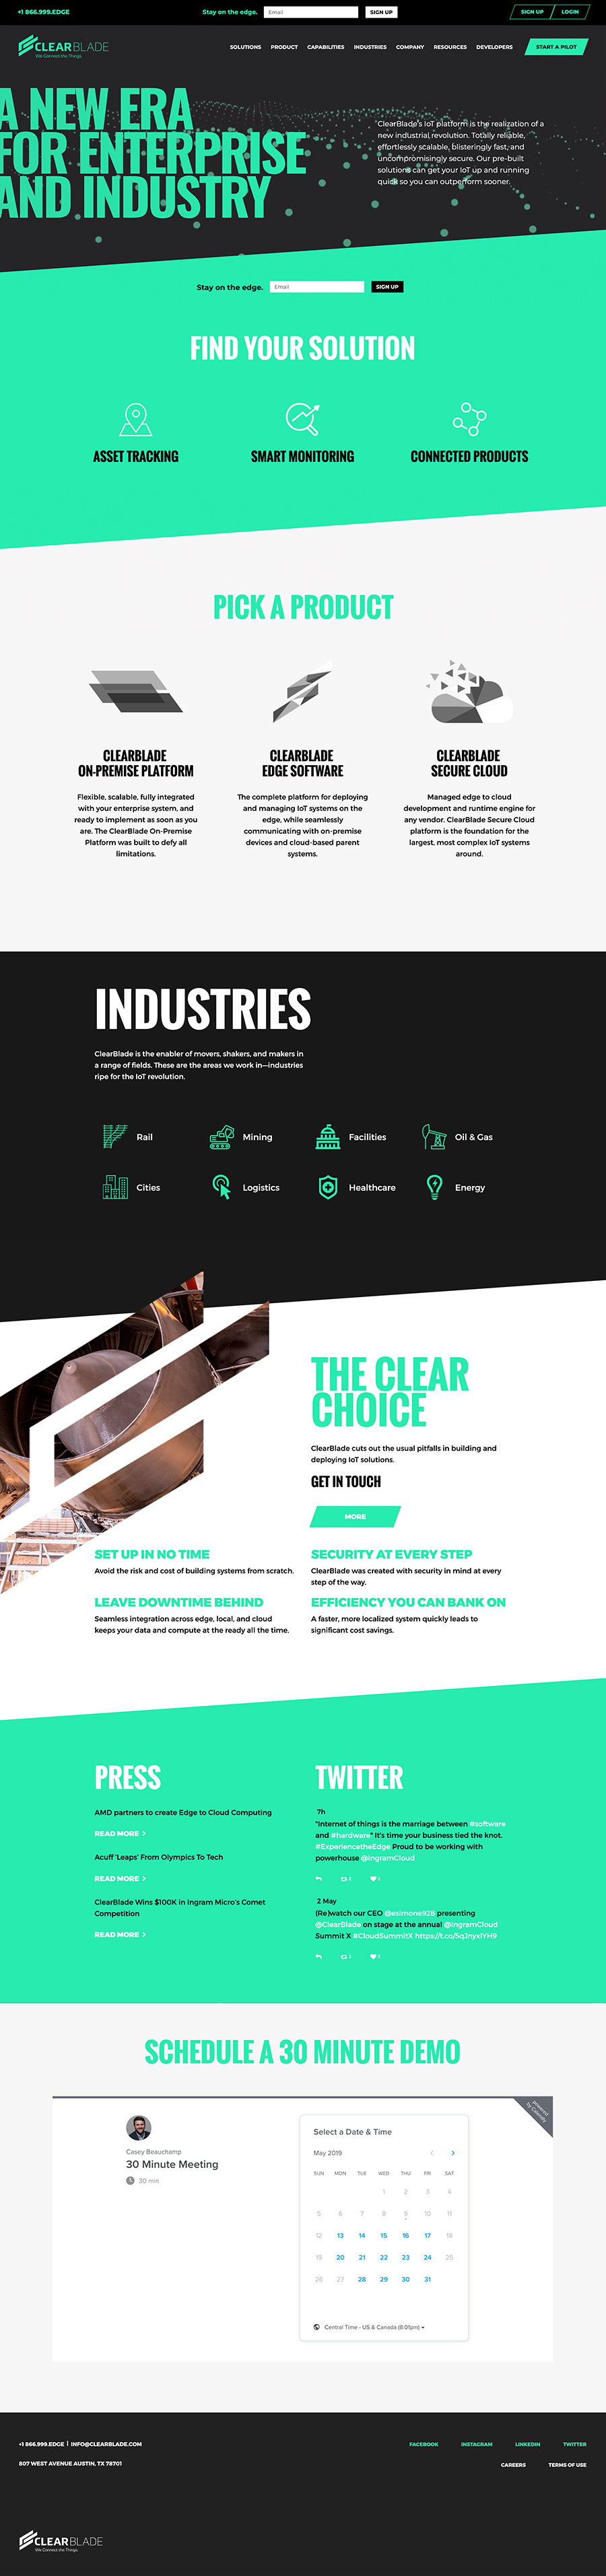 Recent Launch: ClearBlade After